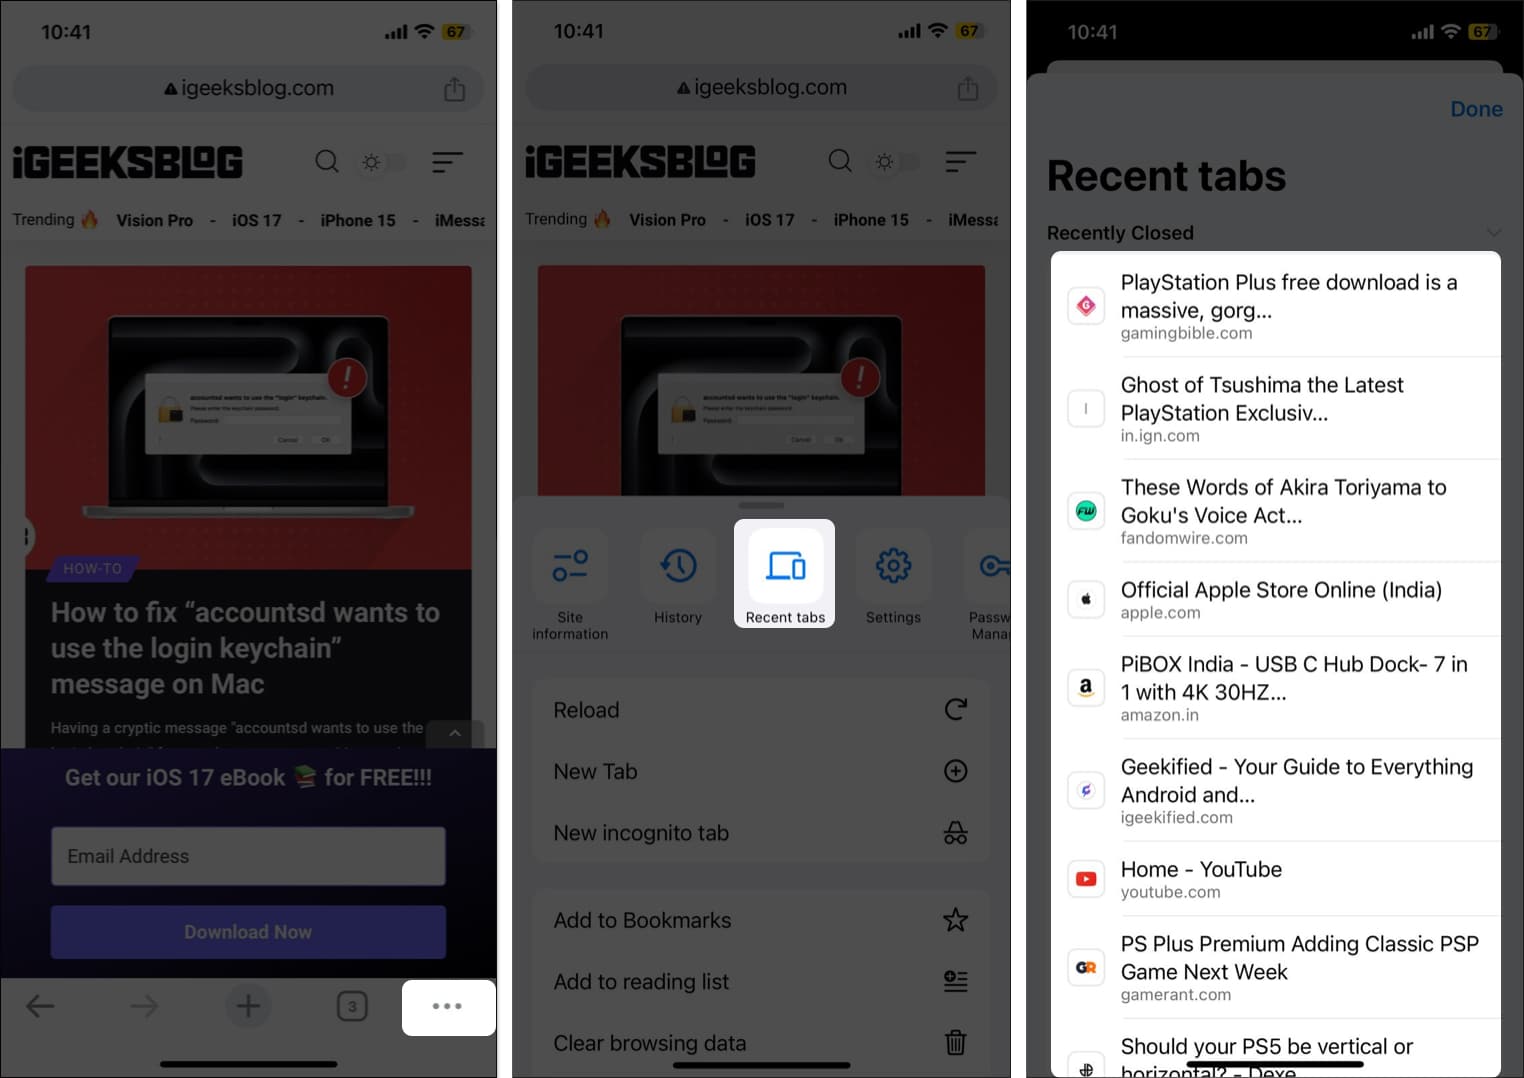 Open Chrome, Tap More icon, Select Recent tabs and select the Web Page you want to reopen in Chrome on your iPhone or iPad